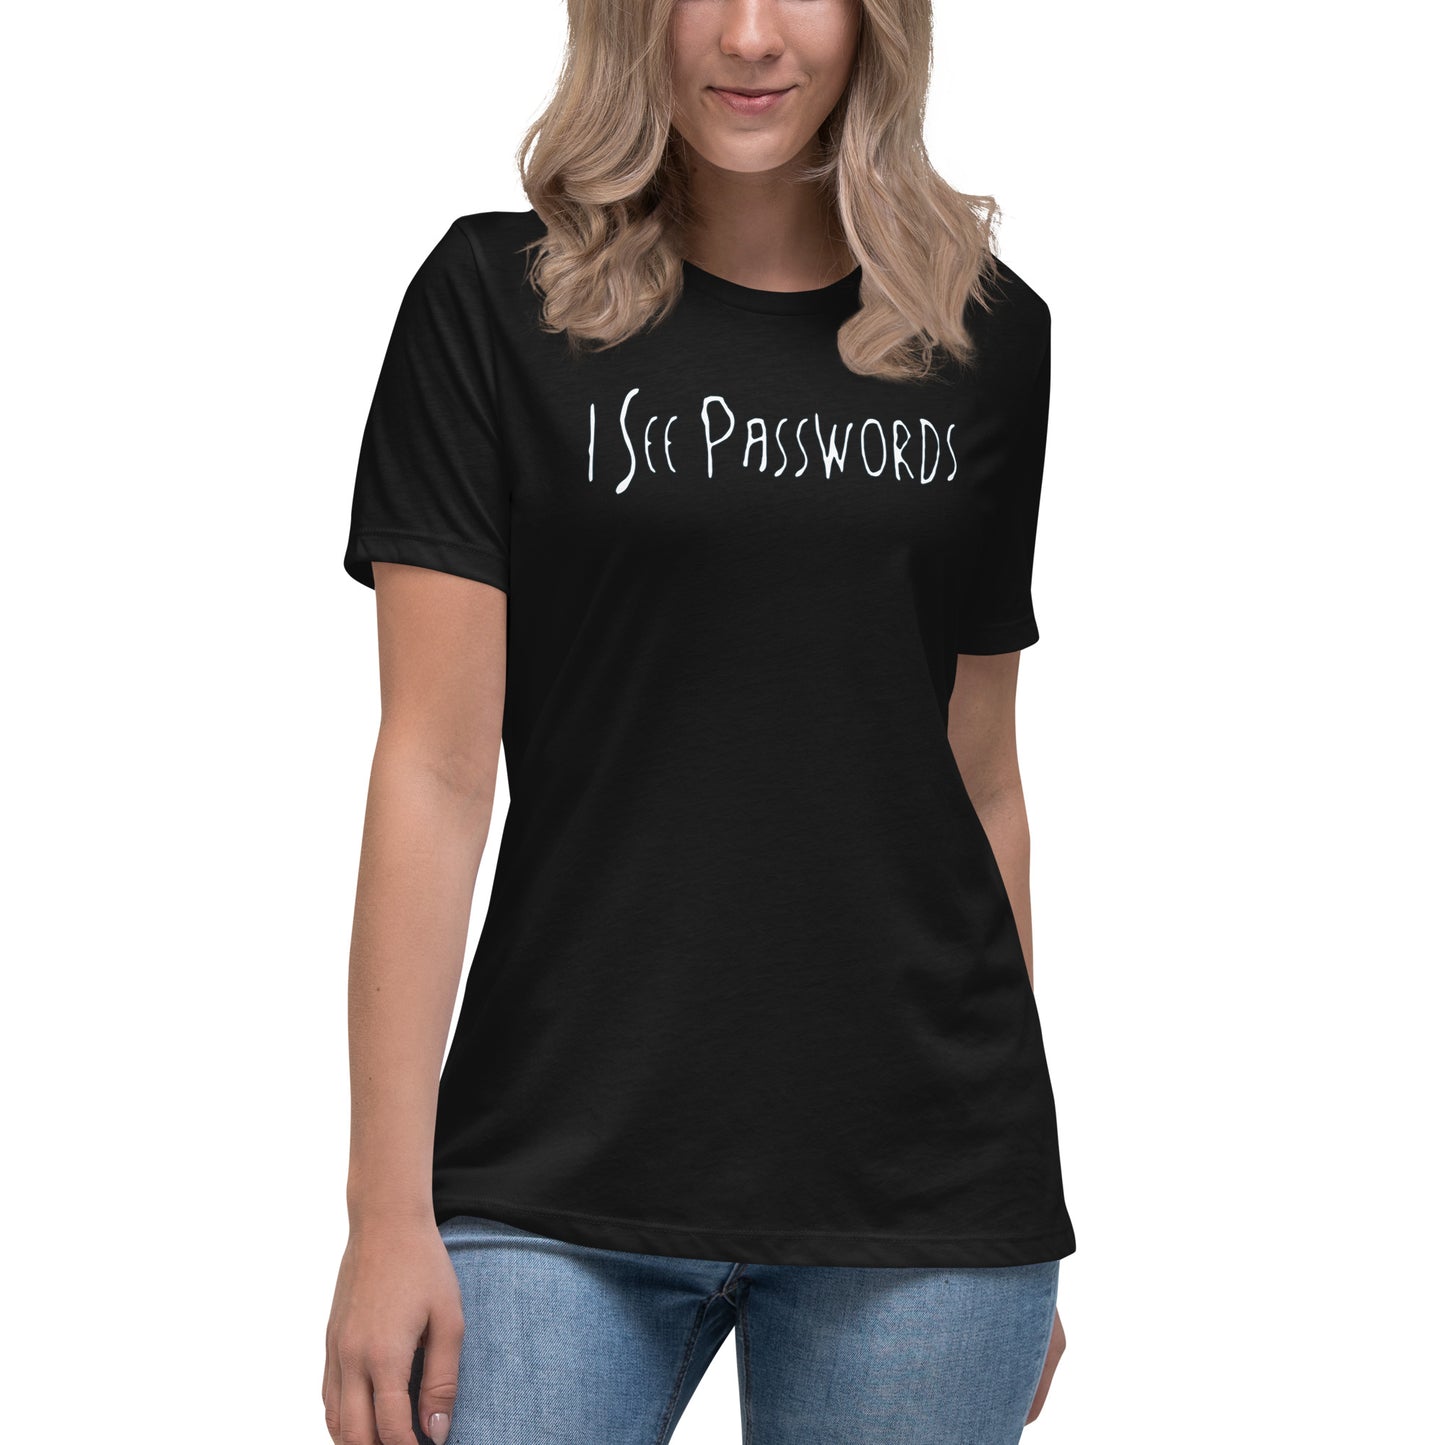 I See Passwords - Women's Relaxed T-Shirt